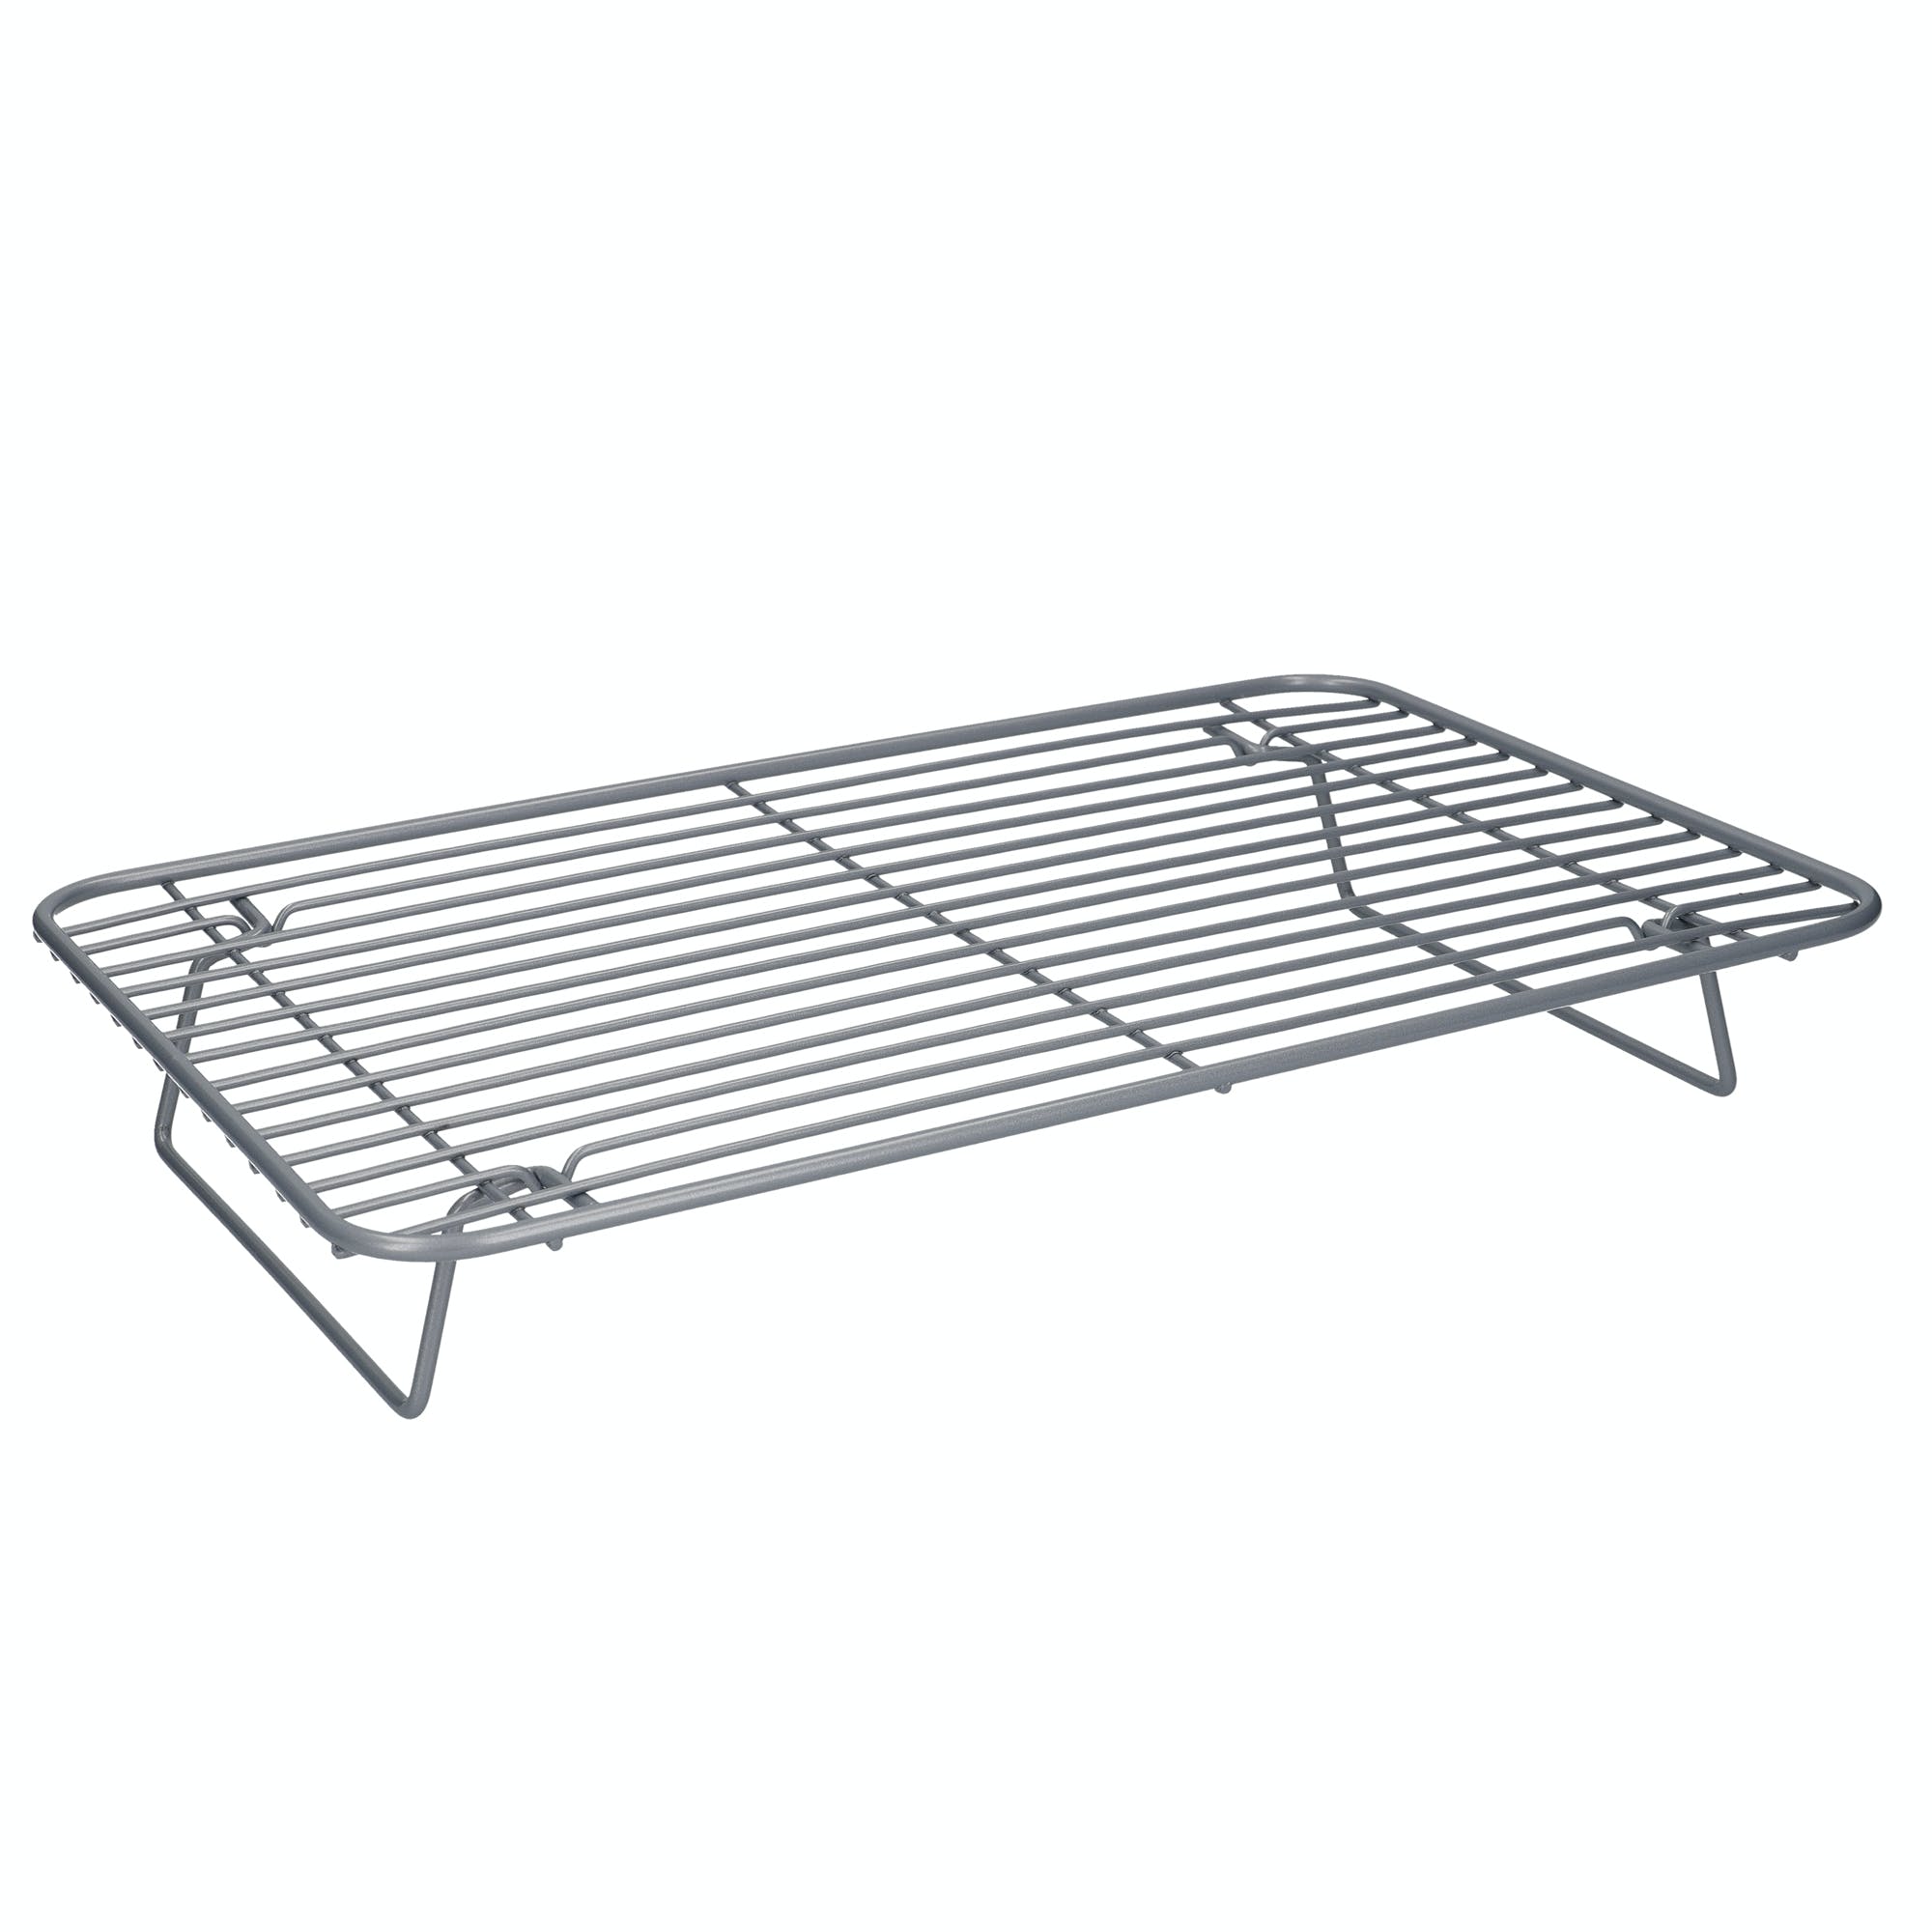 MasterClass Smart Ceramic Roasting / Cooling Rack, Carbon Steel Wire Grey - Kate's Cupboard